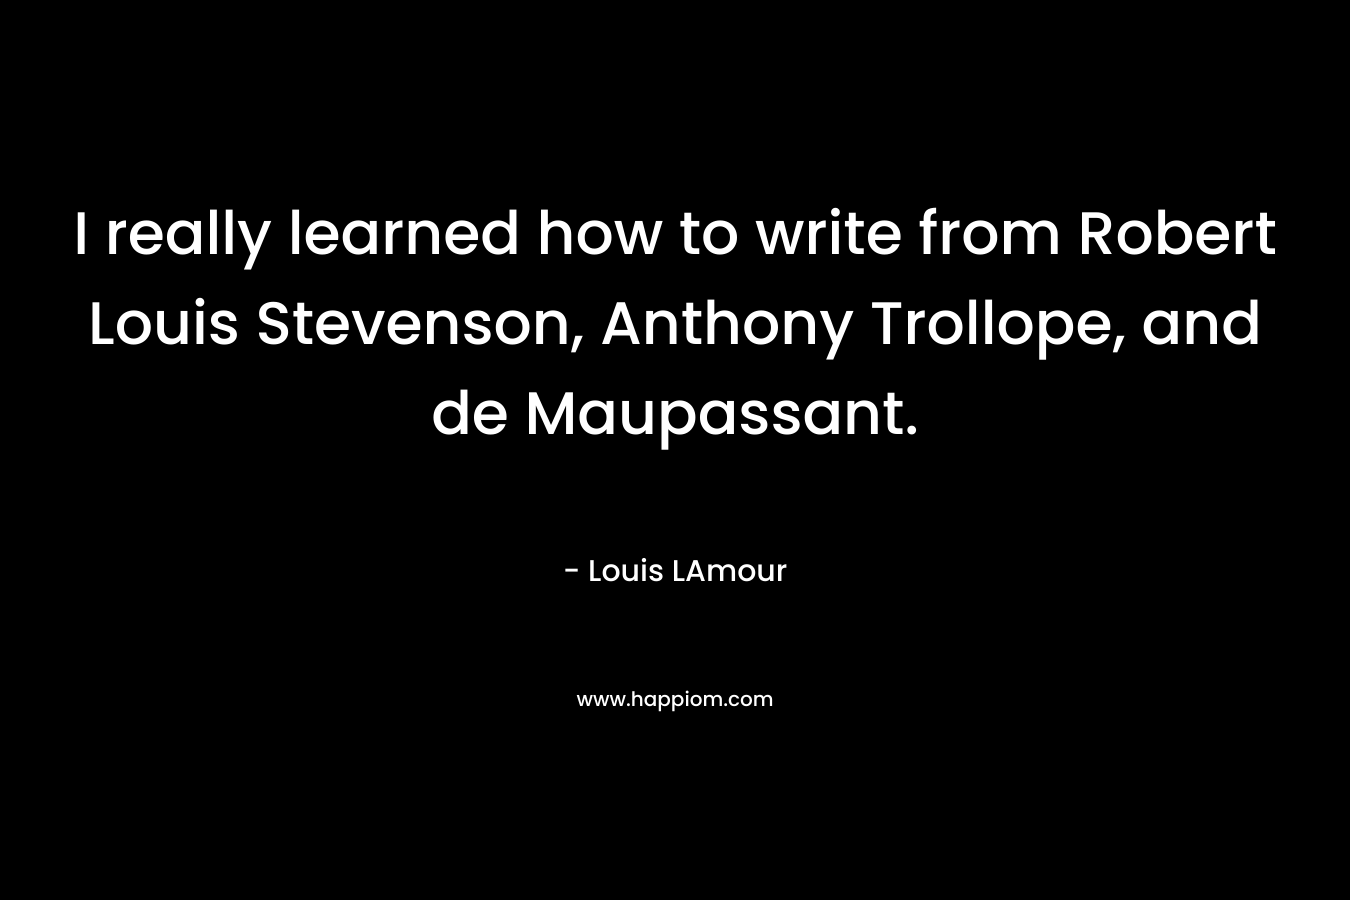 I really learned how to write from Robert Louis Stevenson, Anthony Trollope, and de Maupassant.